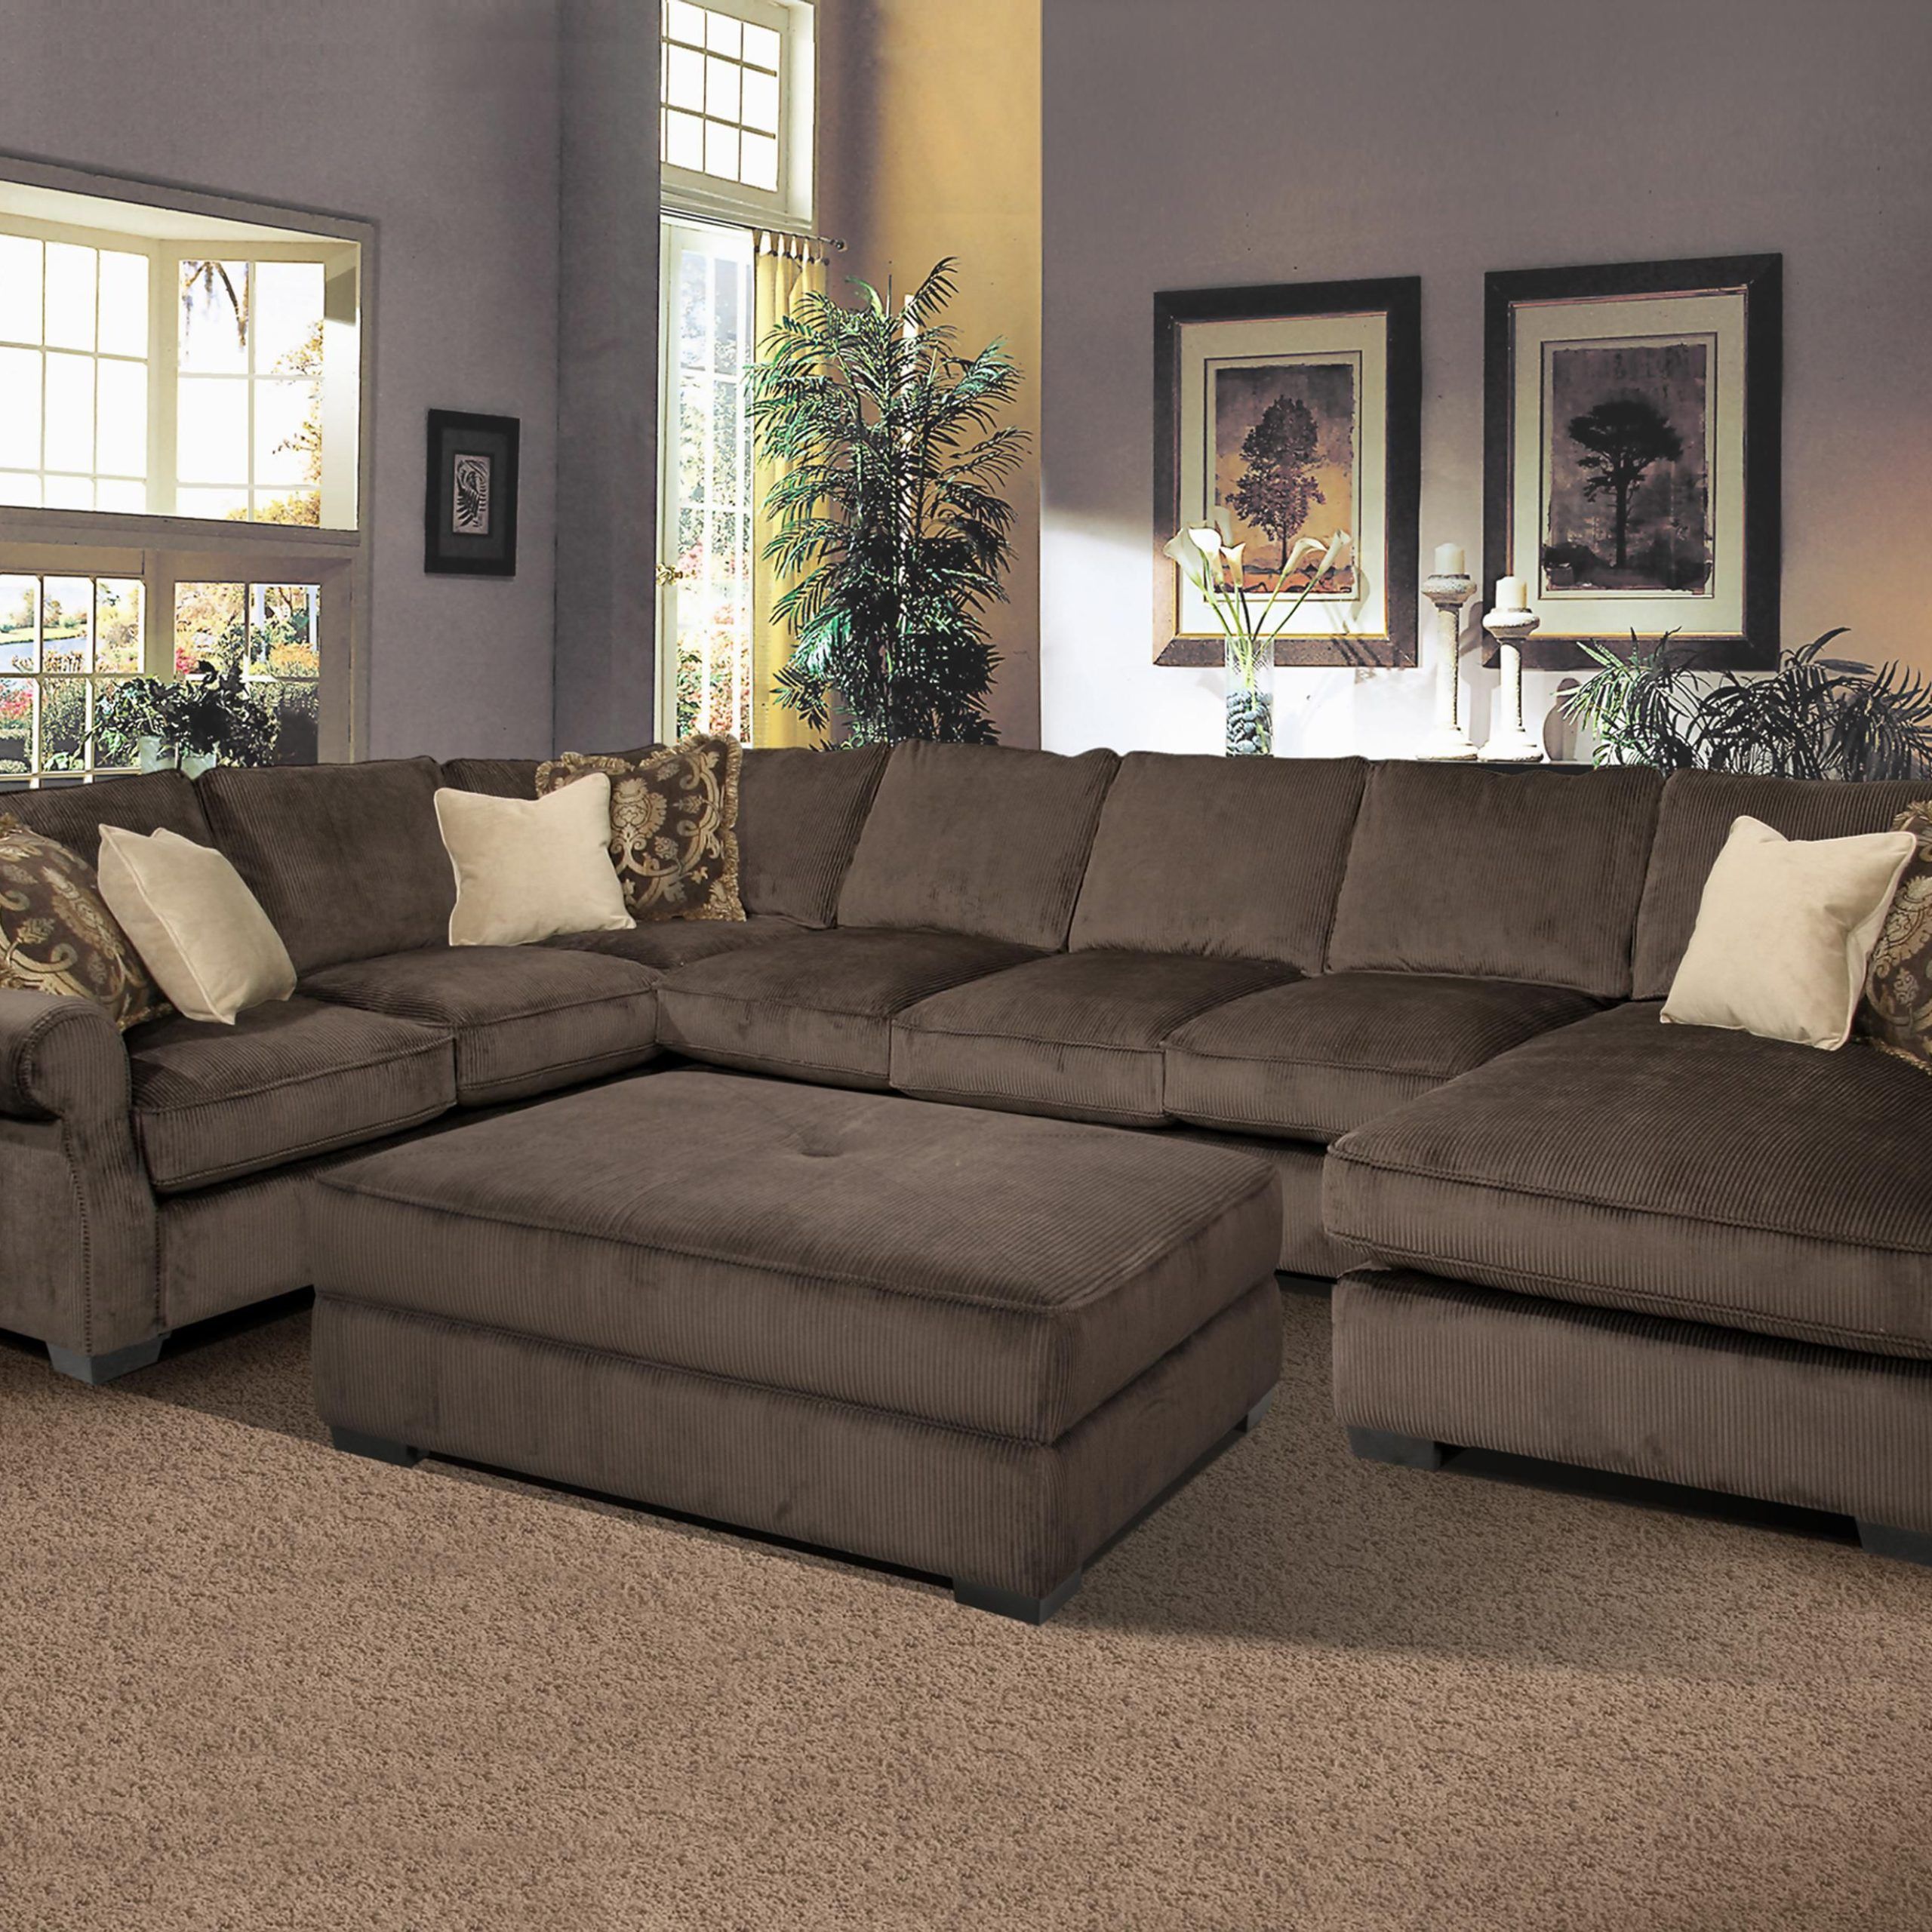 Furniture Elliot Fabric Microfiber 3 Piece Chaise Sectional Sofa Within Microfiber Sectional Corner Sofas (Gallery 9 of 20)